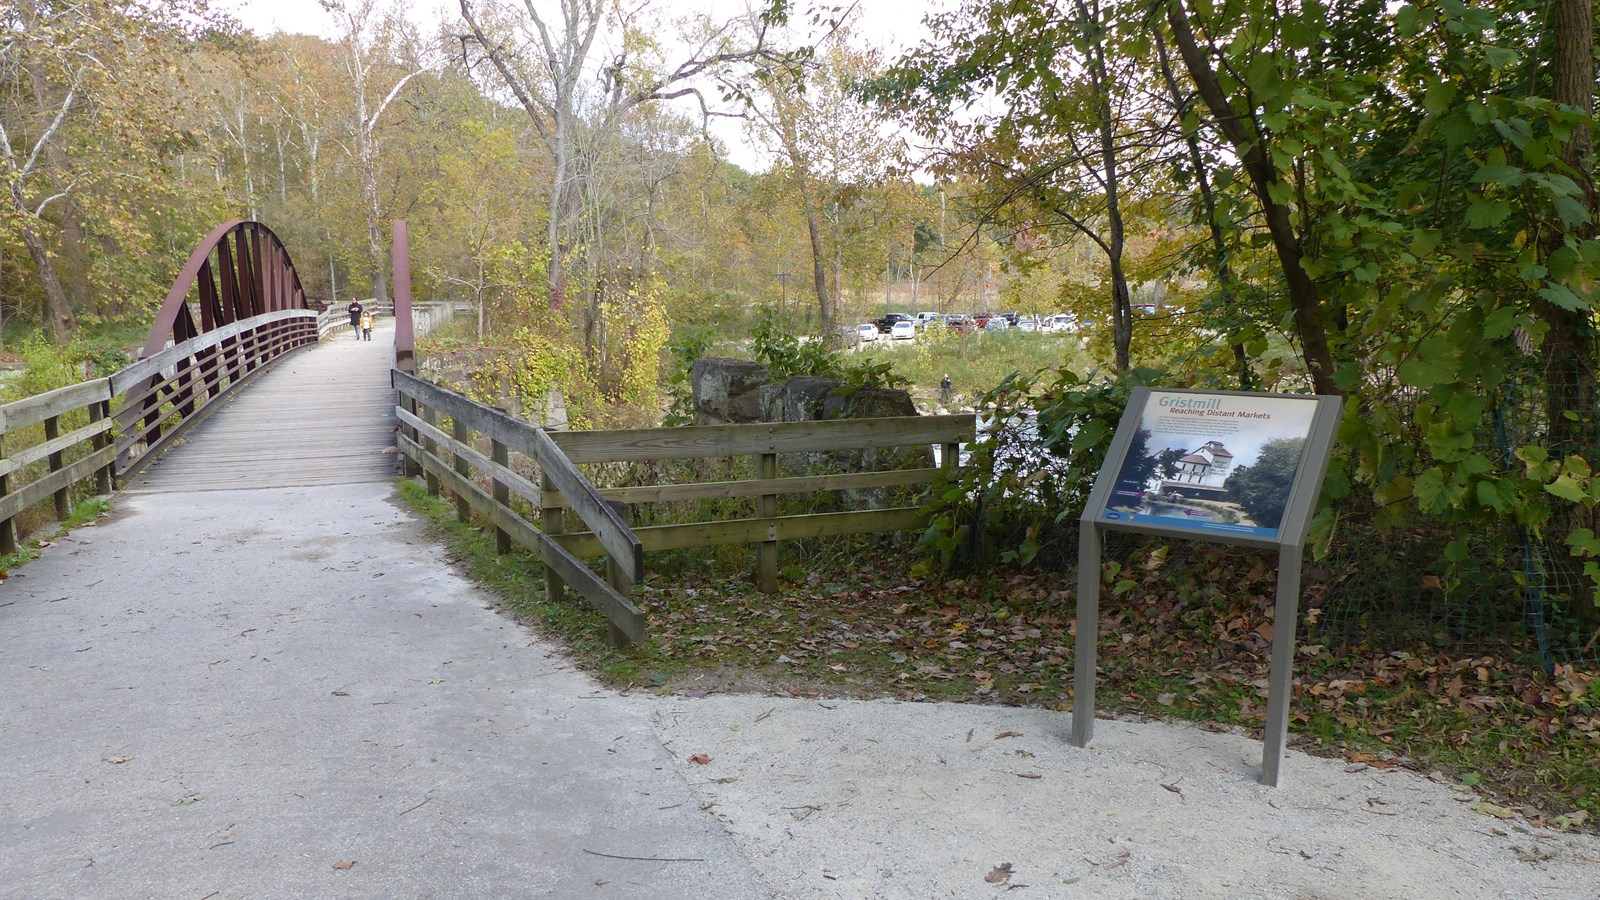 A trail leads by a graphic panel and stone wall, and crosses a pedestrian bridge to a parking lot.